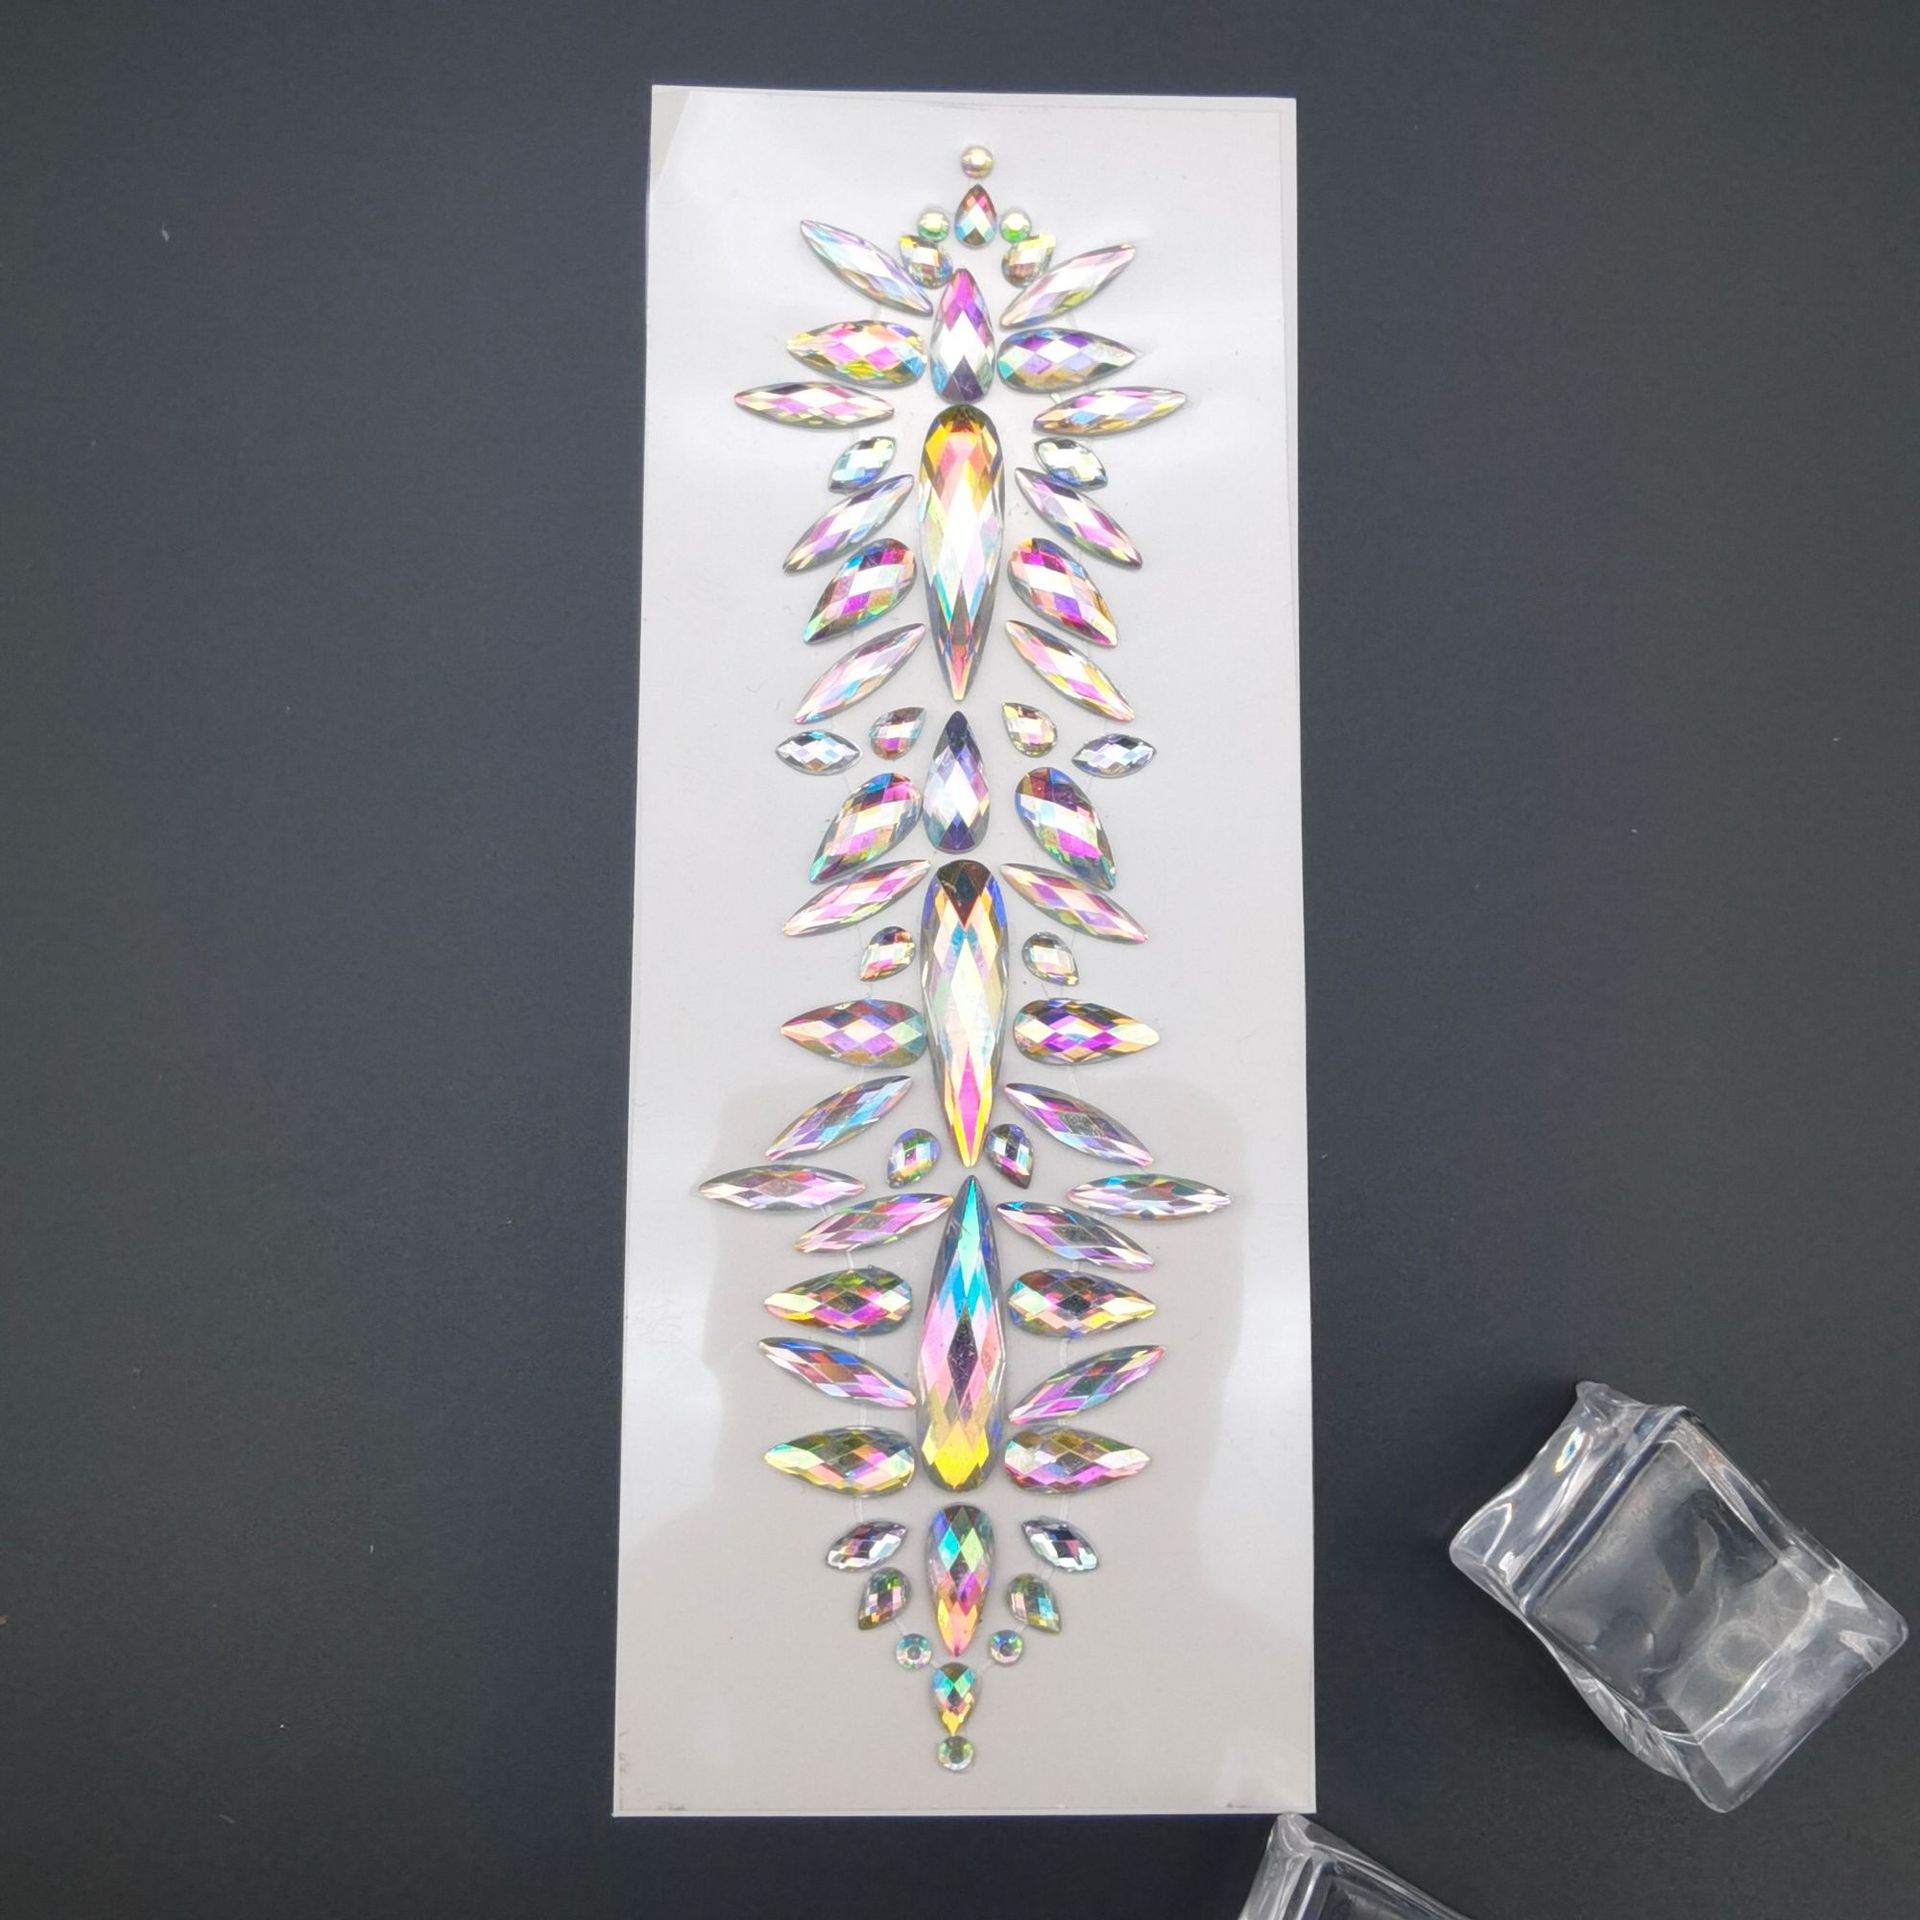 3D Crystal Resin Drill Stickers For EDM Music Festival, Fashionable Face  Accessory, Forehead Stage Decor, And Temporary Hair Tattoo Sticker From  My_story, $1.11